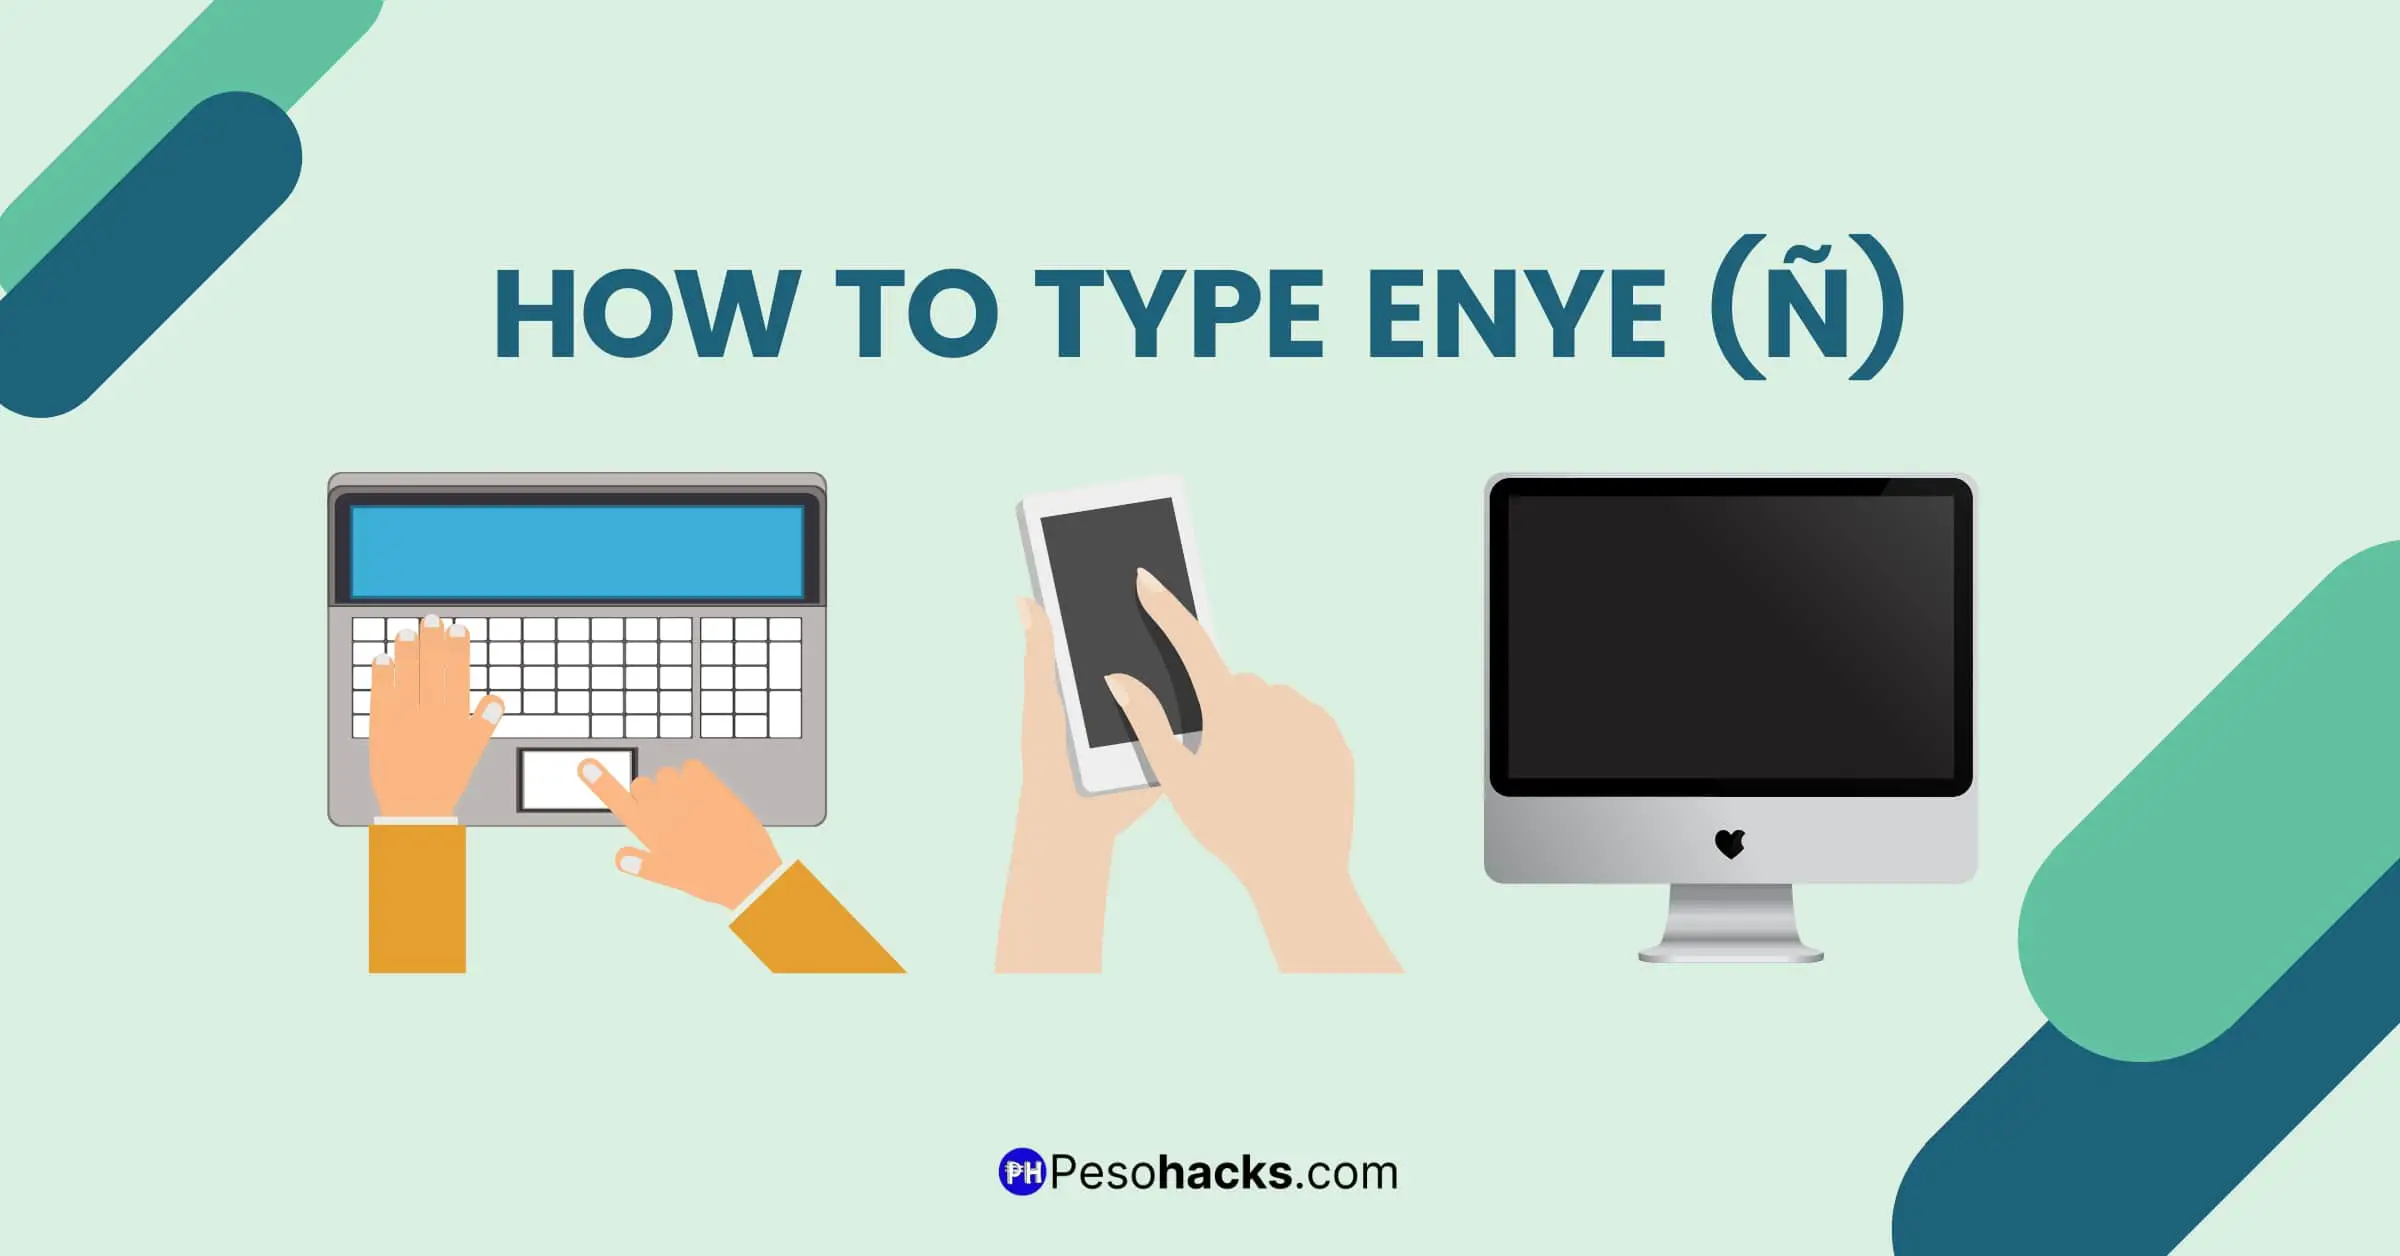 How to type enye